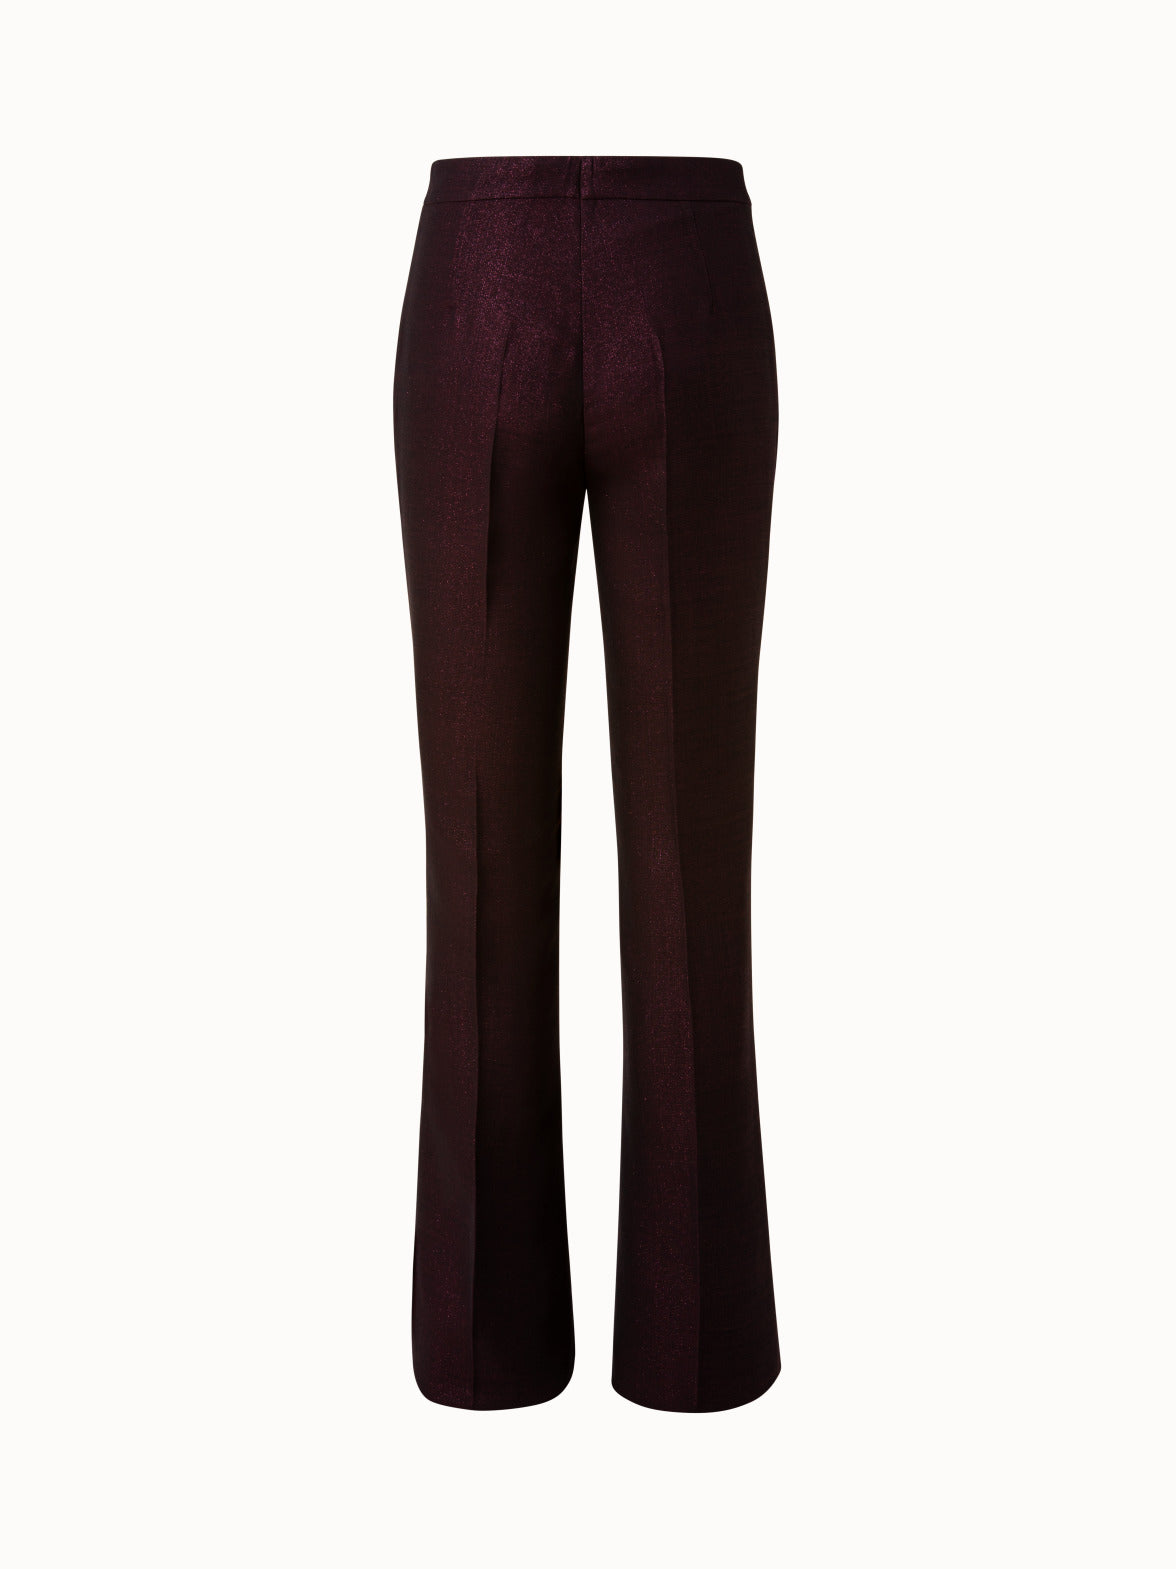 Wool Double-Face Stretch Bootcut Pants